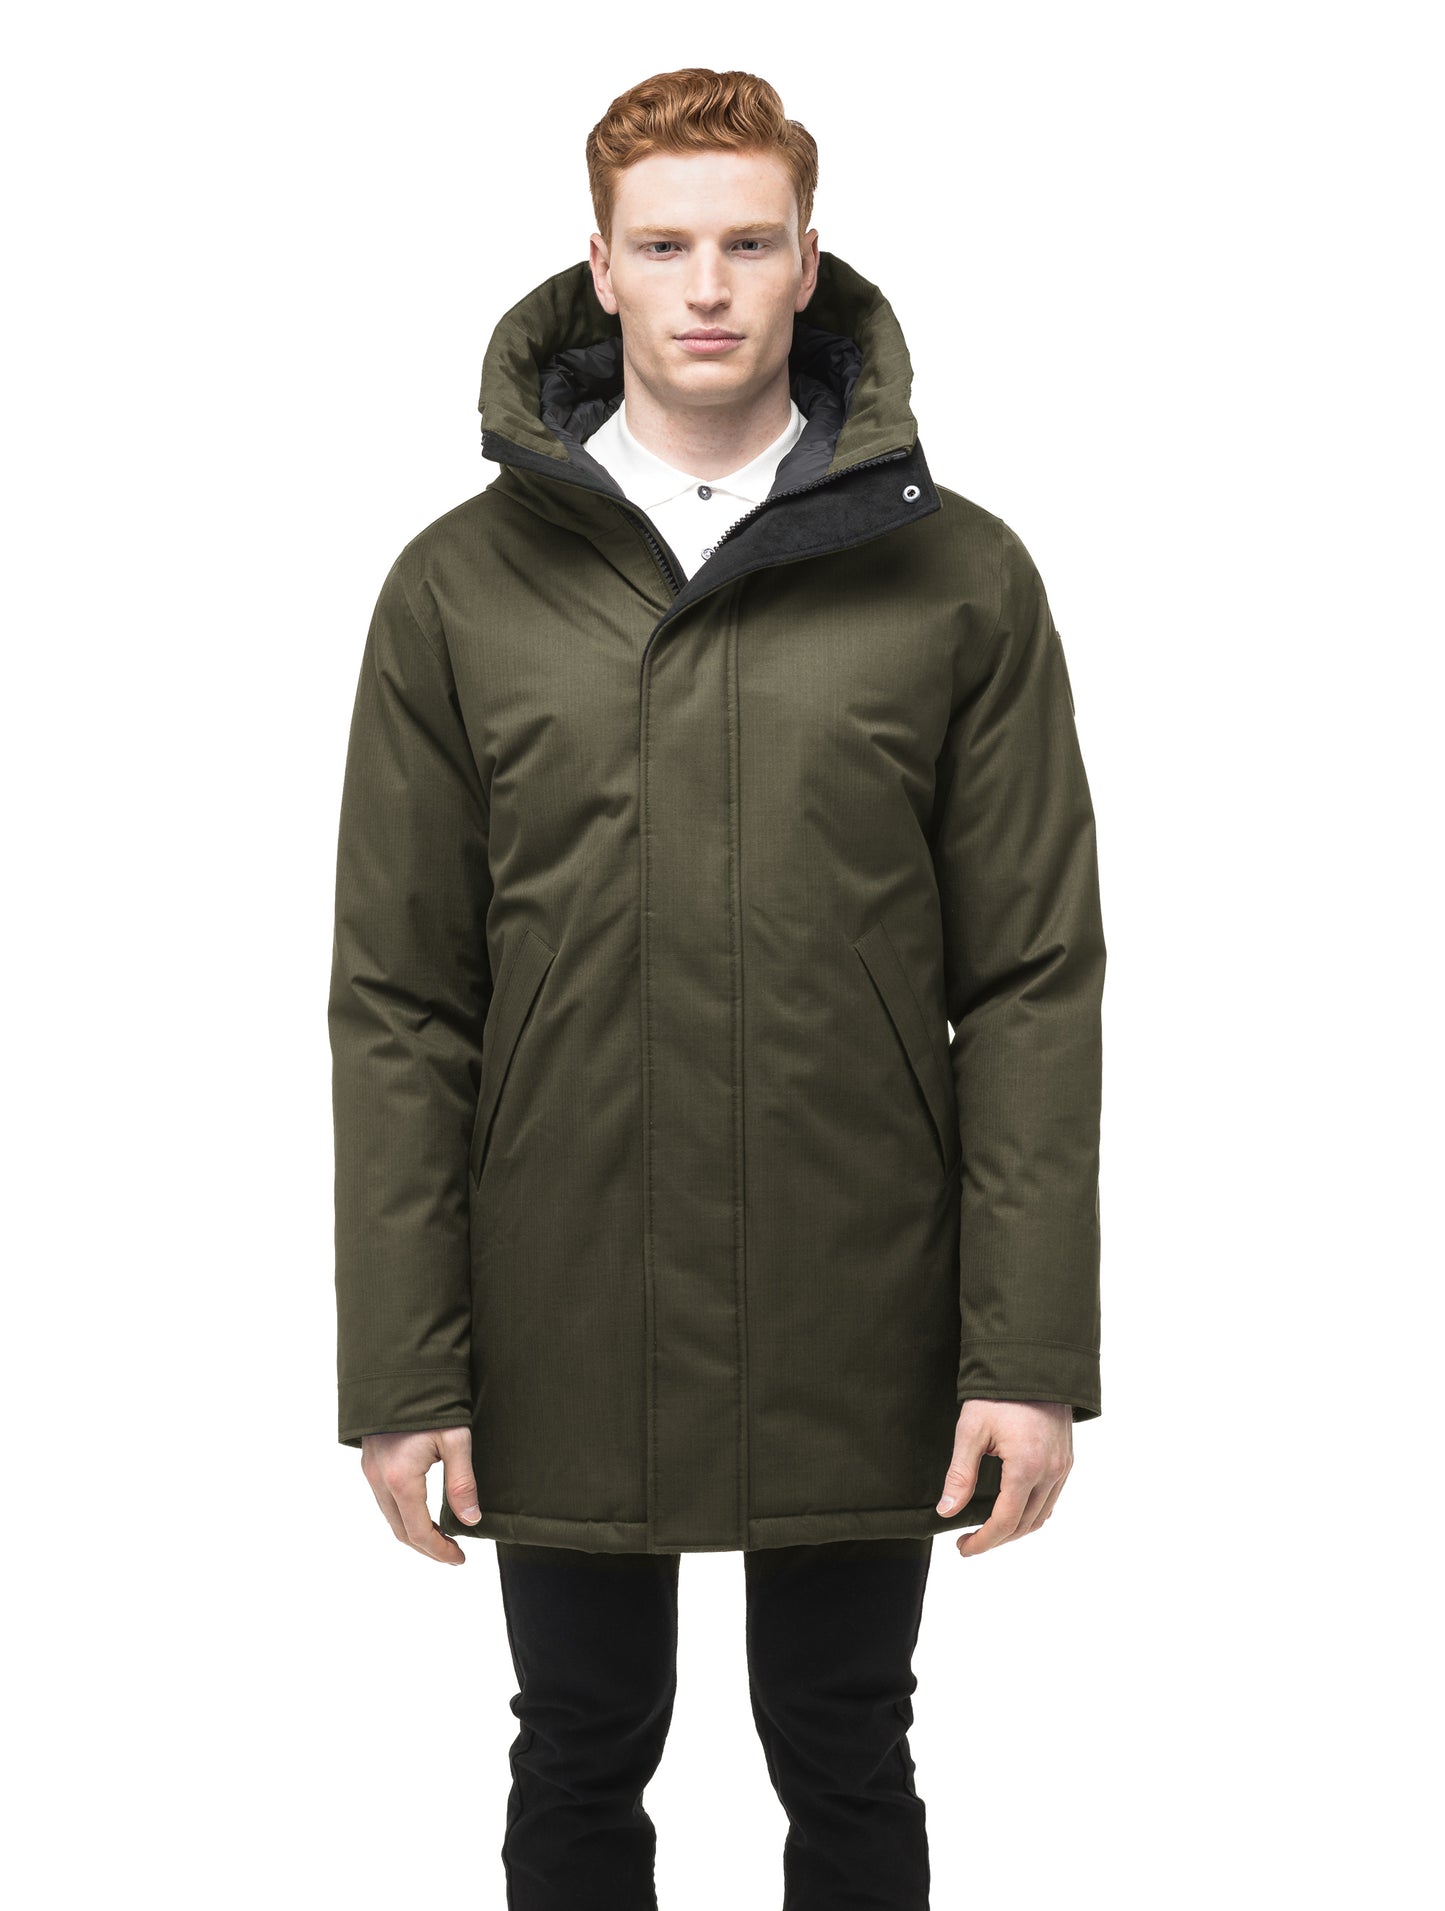 Pierre Men's Jacket in thigh length, Canadian white duck down insulation, non-removable down-filled hood, angled waist pockets, centre-front zipper with wind flap, and elastic ribbed cuffs, in Fatigue